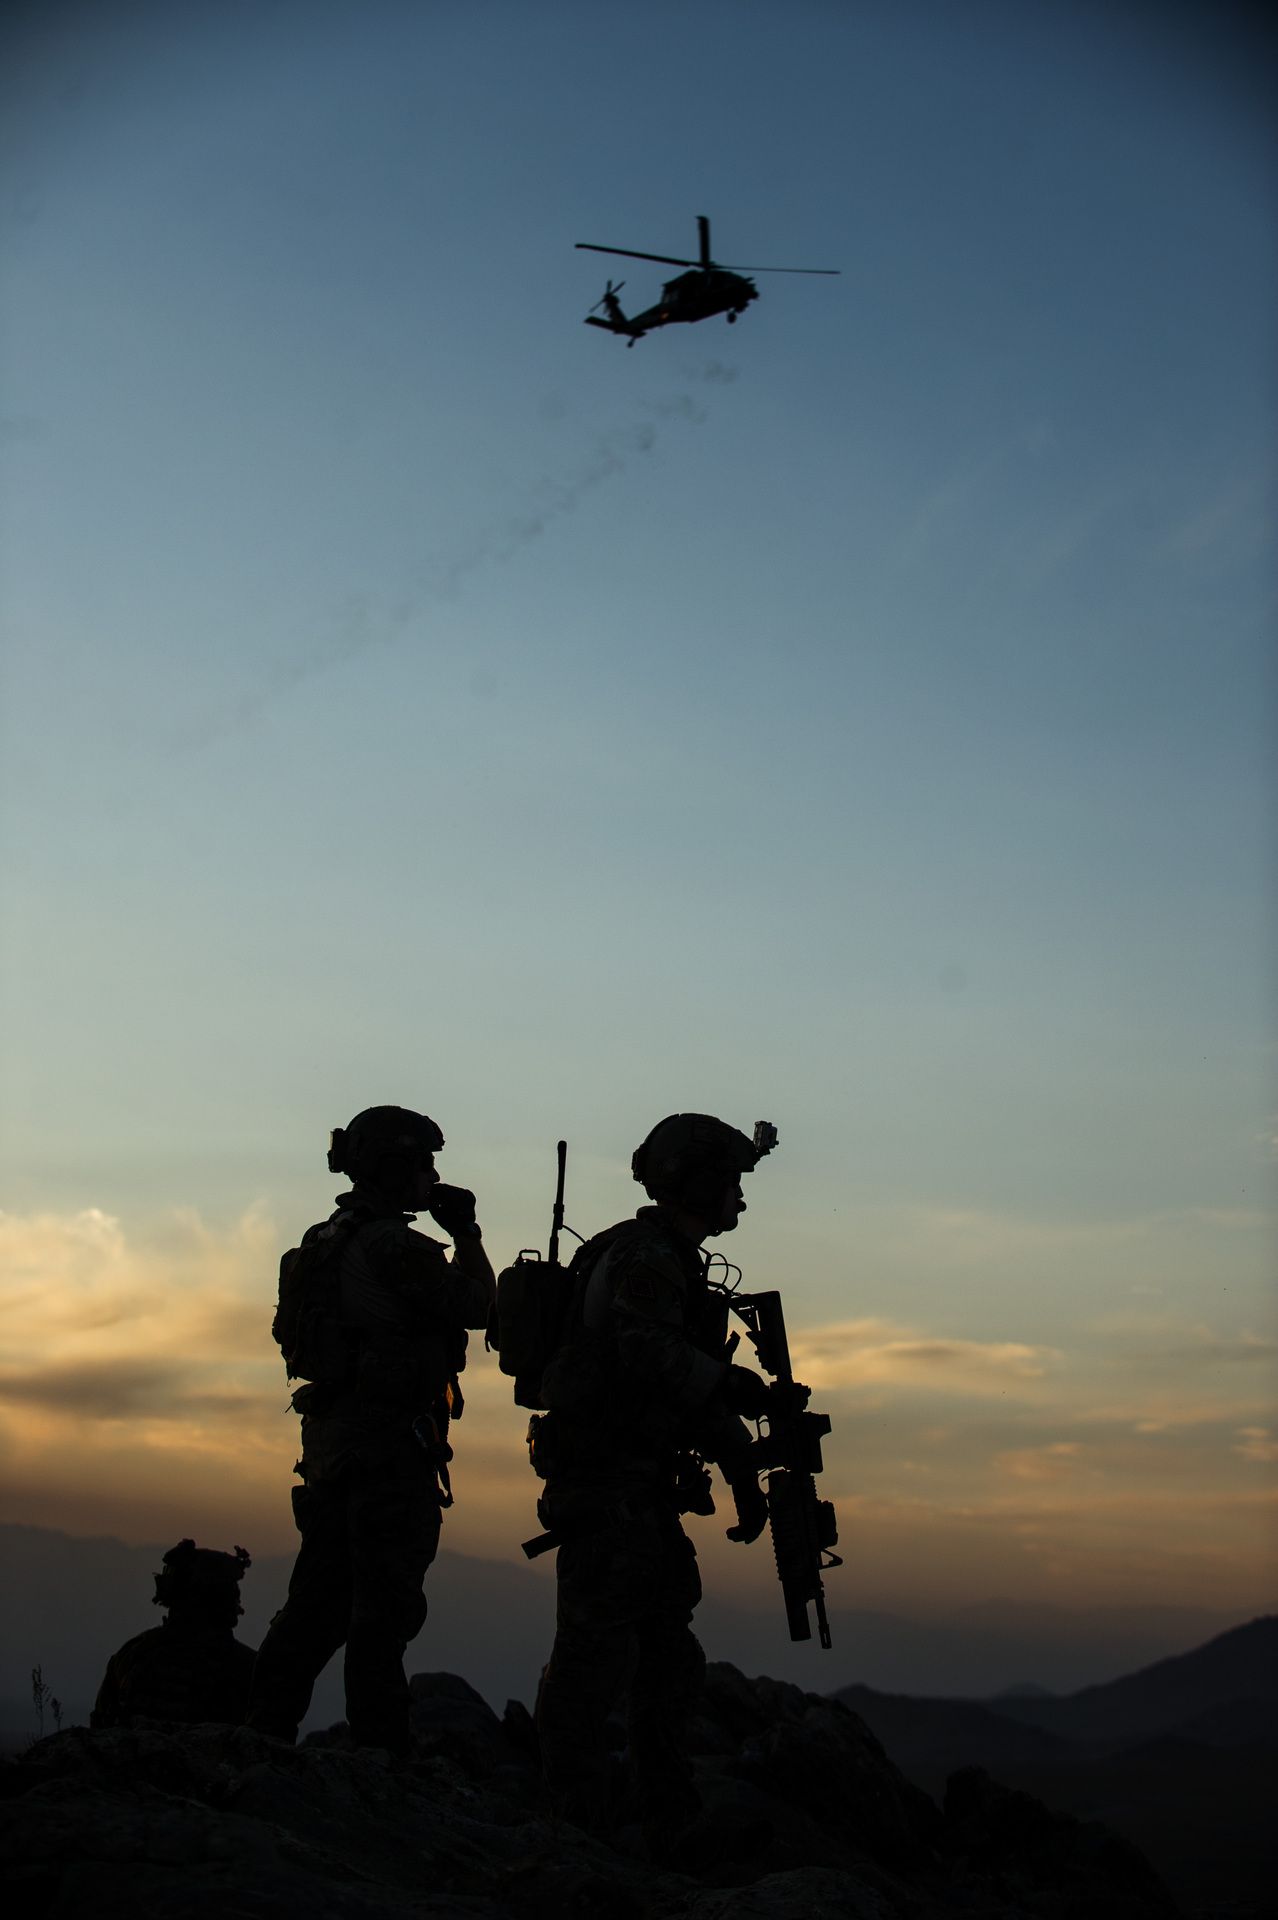 Best Rescue image. Air force pararescue, Special forces, Usaf